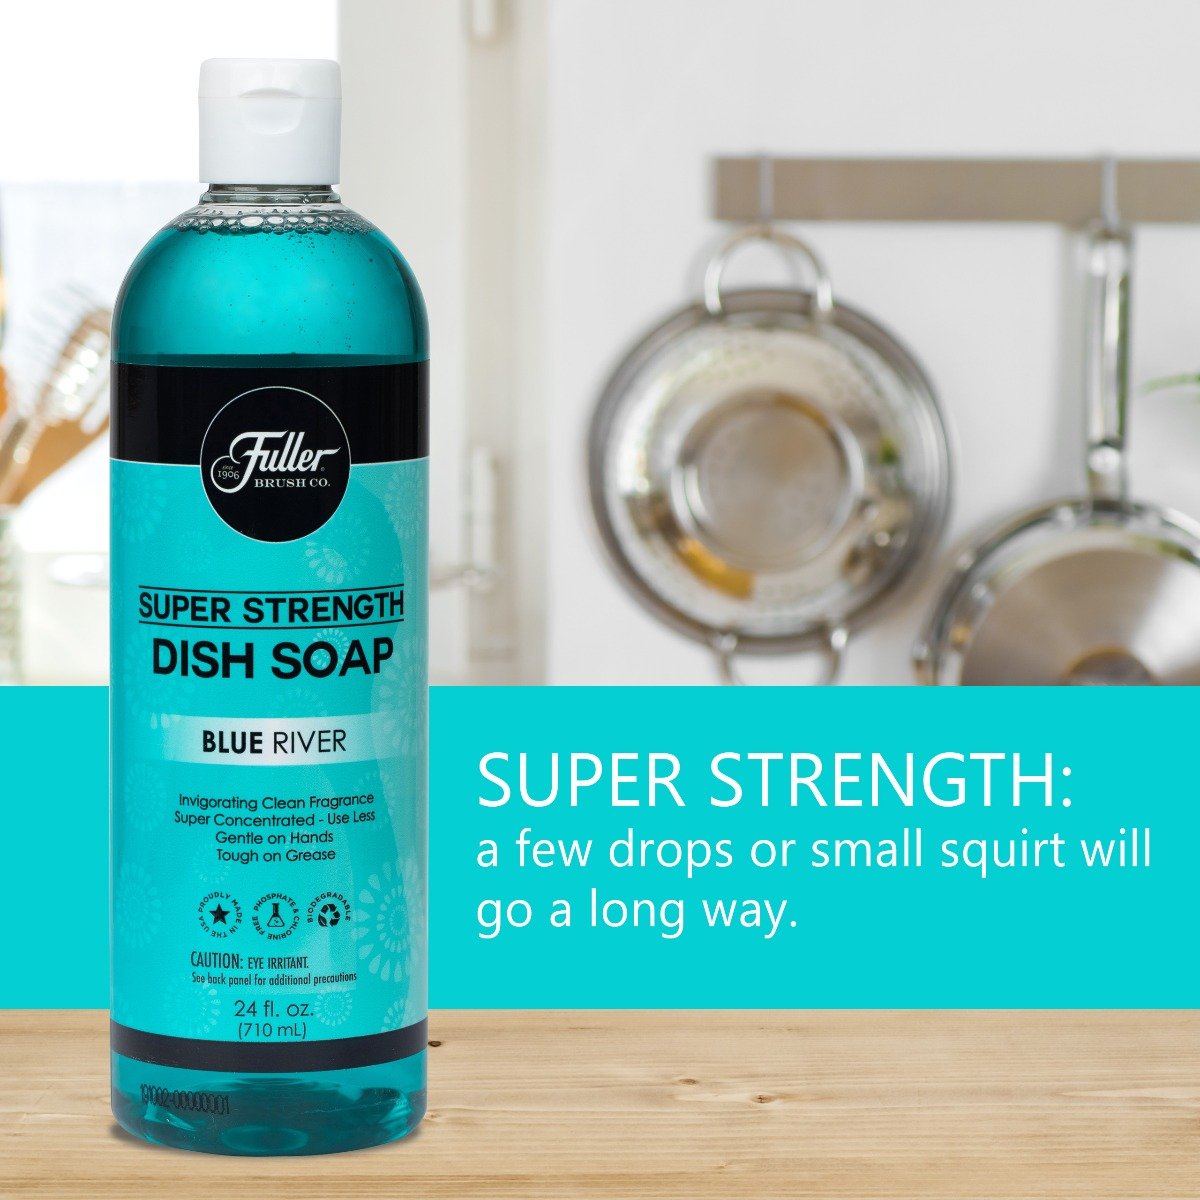 Dish Soap Super Strength - Blue River Invigorating Clean Fragrance-Cleaning Agents-Fuller Brush Company